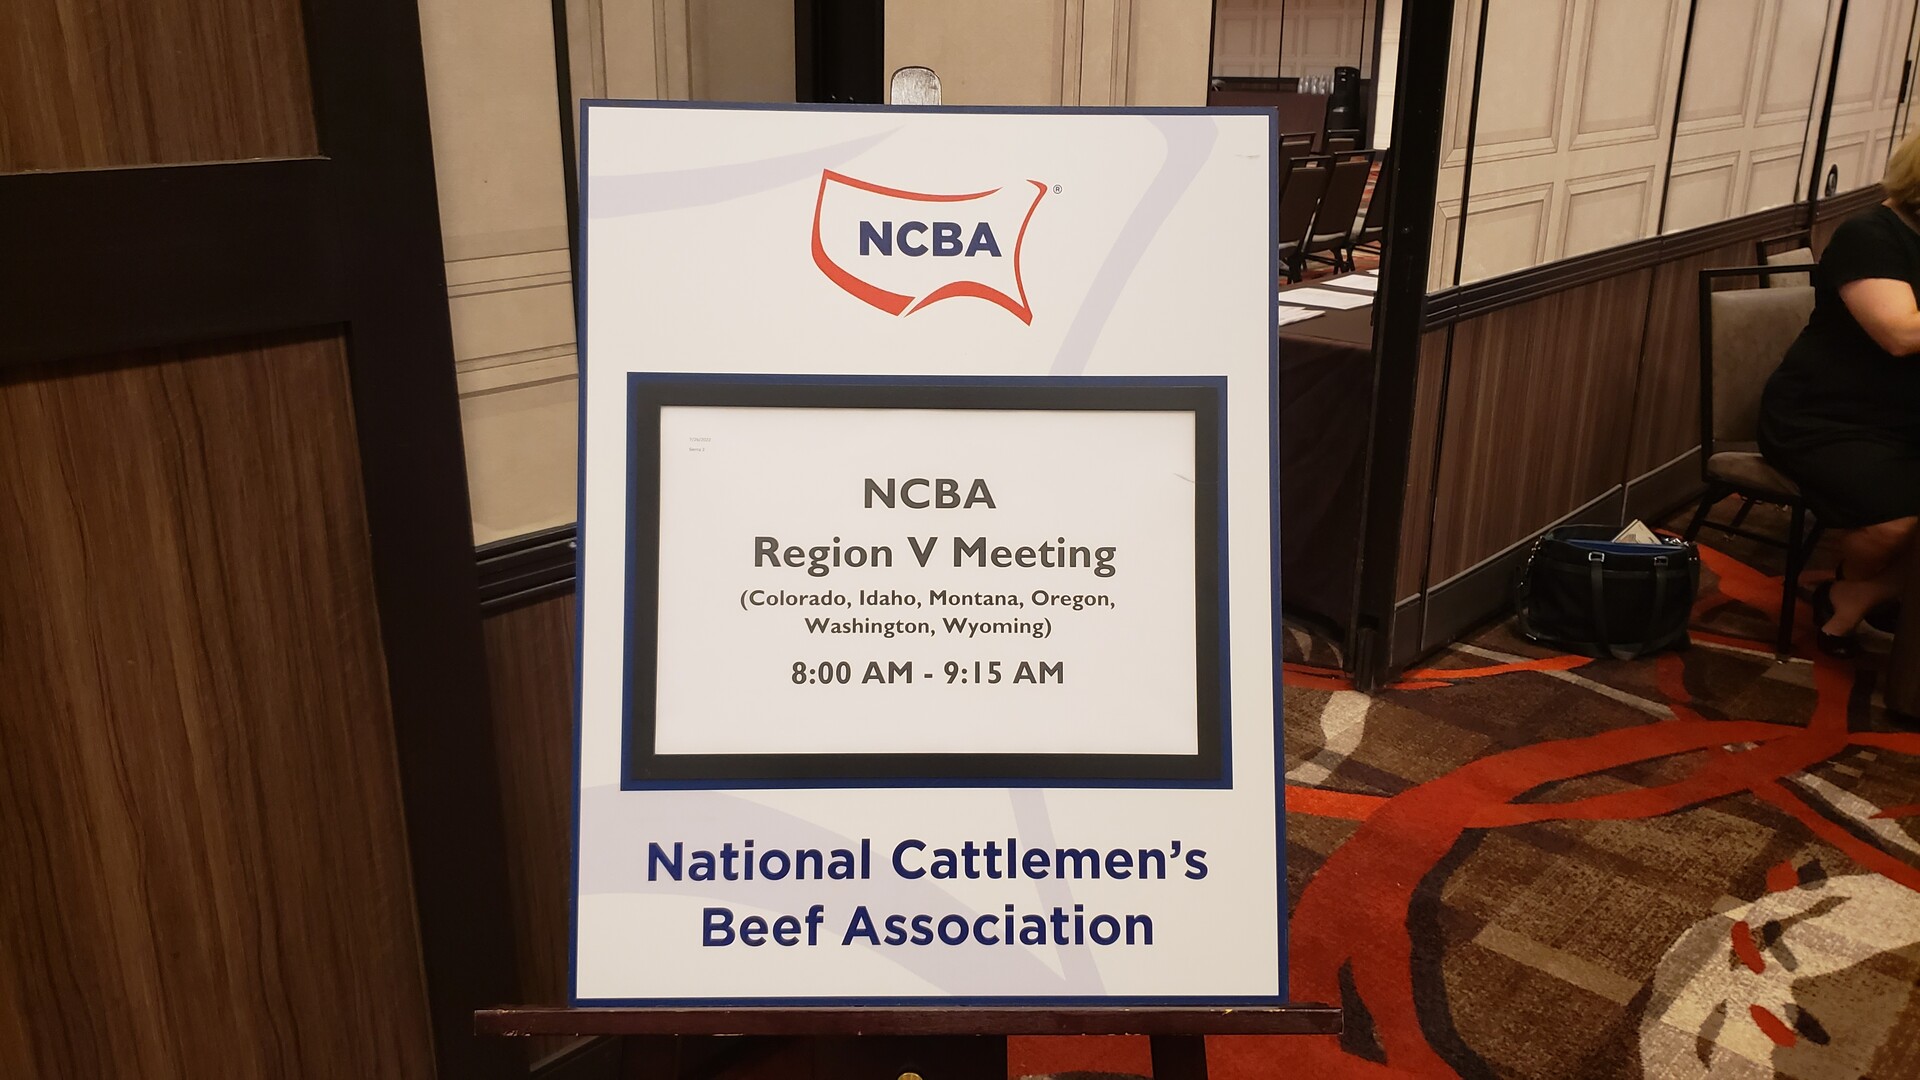 Cattle Producers Meeting in Reno for Summer Business Meeting